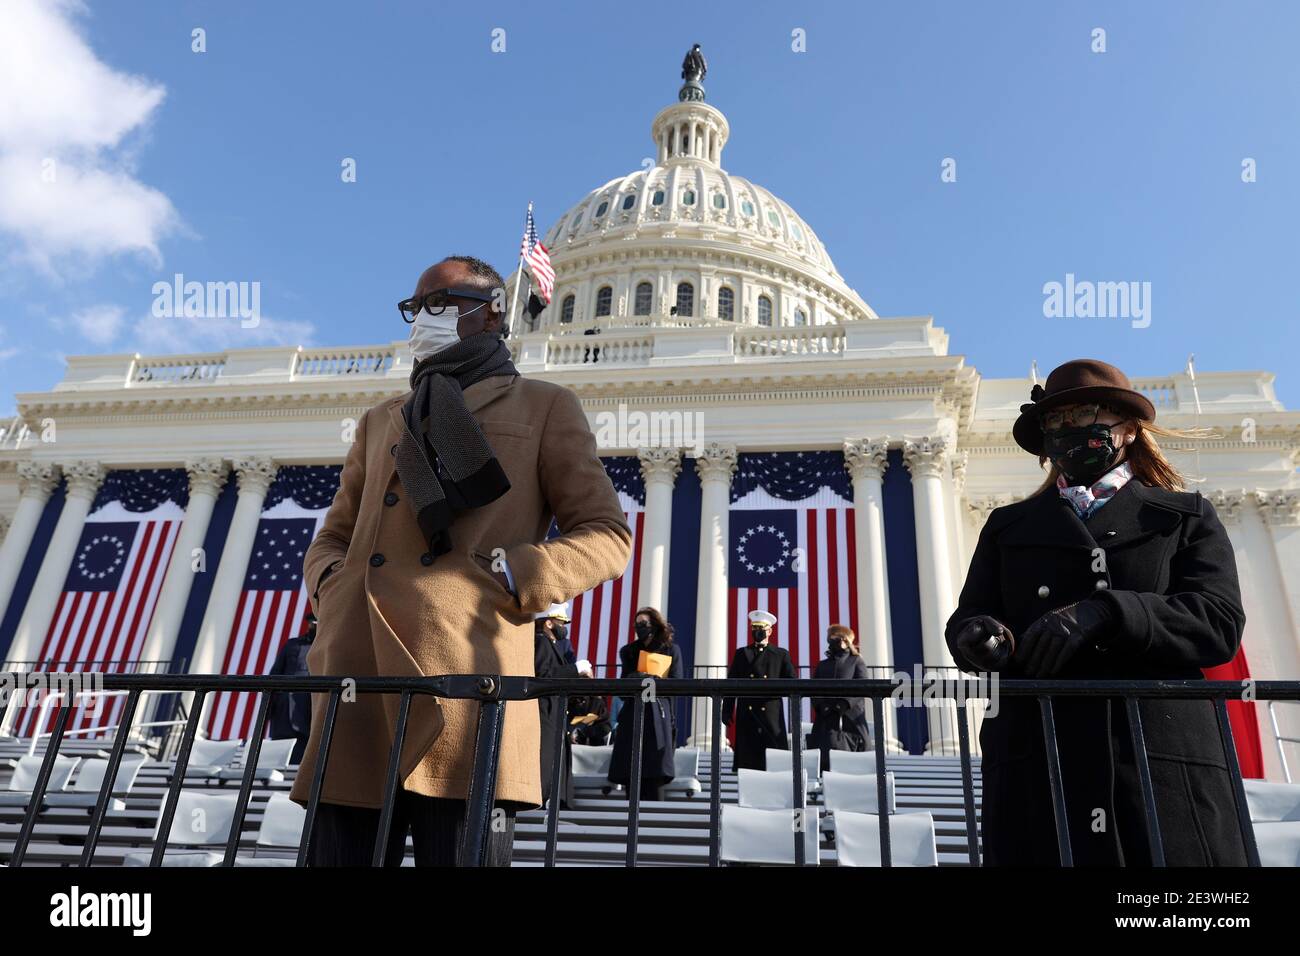 Washington, DC, USA. 20th Jan, 2021. Guests attend the inauguration of U.S. President Joe Biden on the West Front of the U.S. Capitol on January 20, 2021 in Washington, DC. During today's inauguration ceremony Joe Biden becomes the 46th president of the United States. ( Credit: Tasos Katopodis/Getty Images)/Media Punch/Alamy Live News Stock Photo